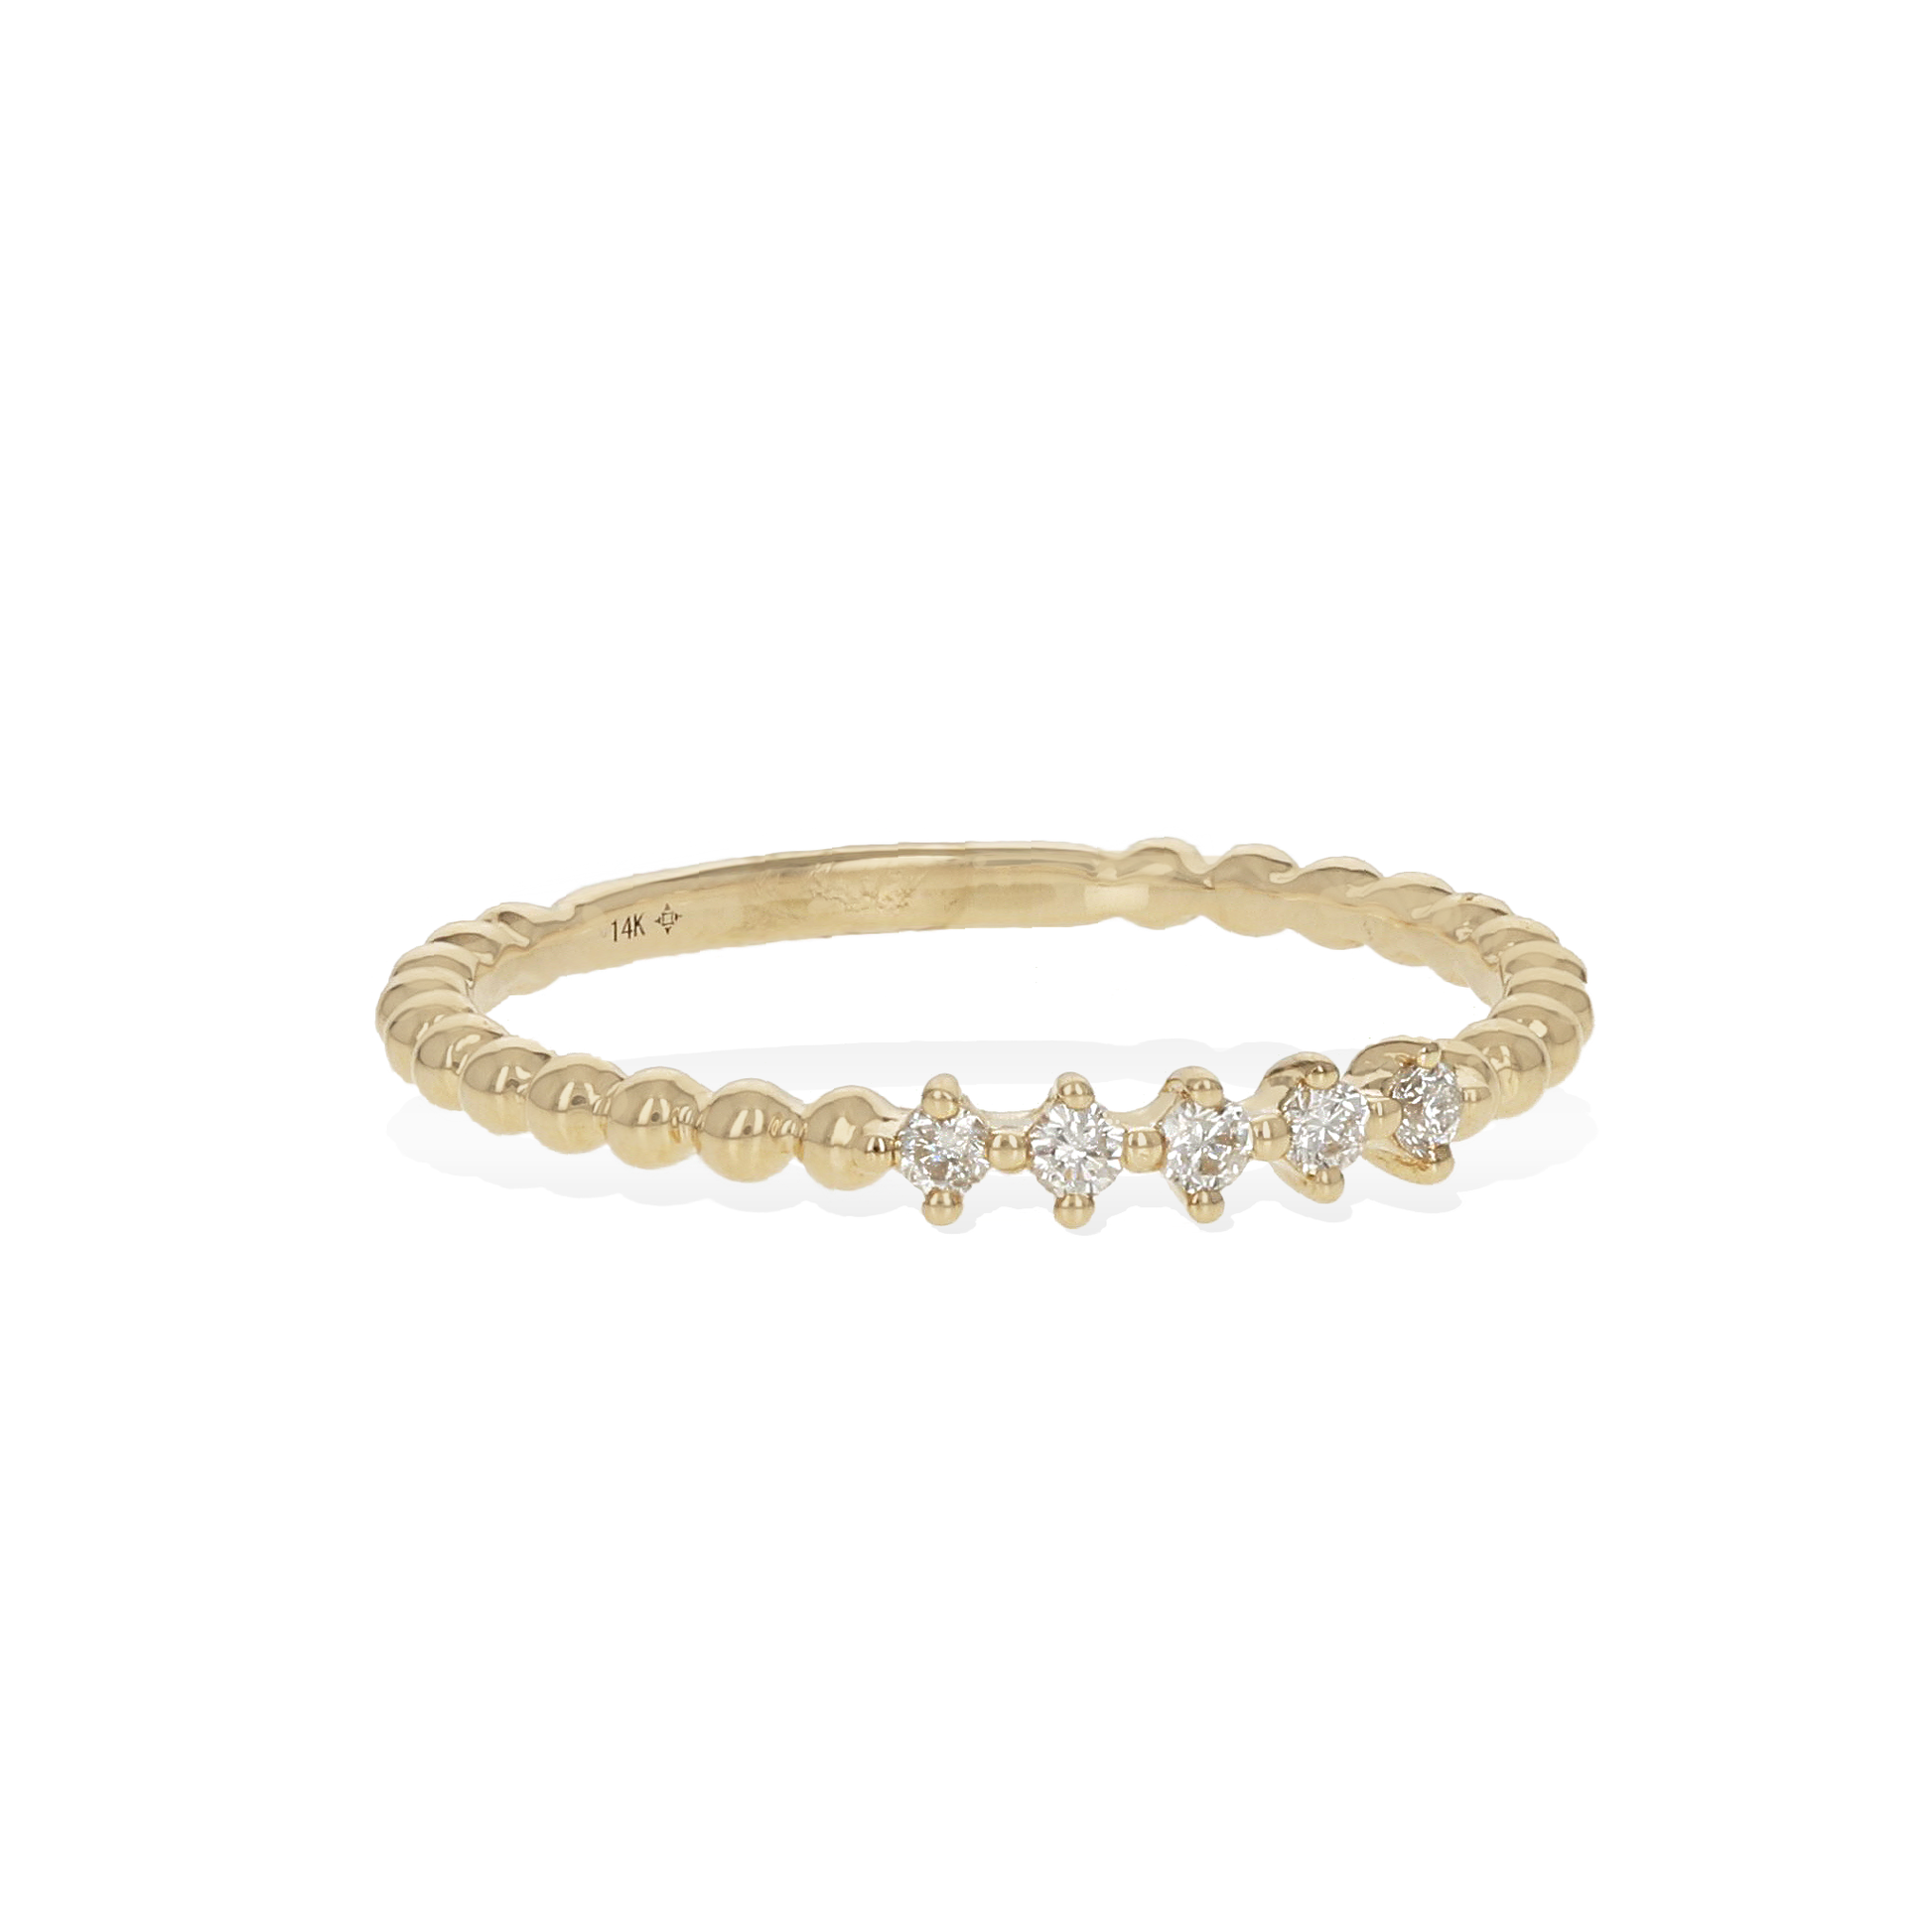 Five Round Diamond Thin Stacking Ring in 14k Gold from Alexandra Marks Jewelry